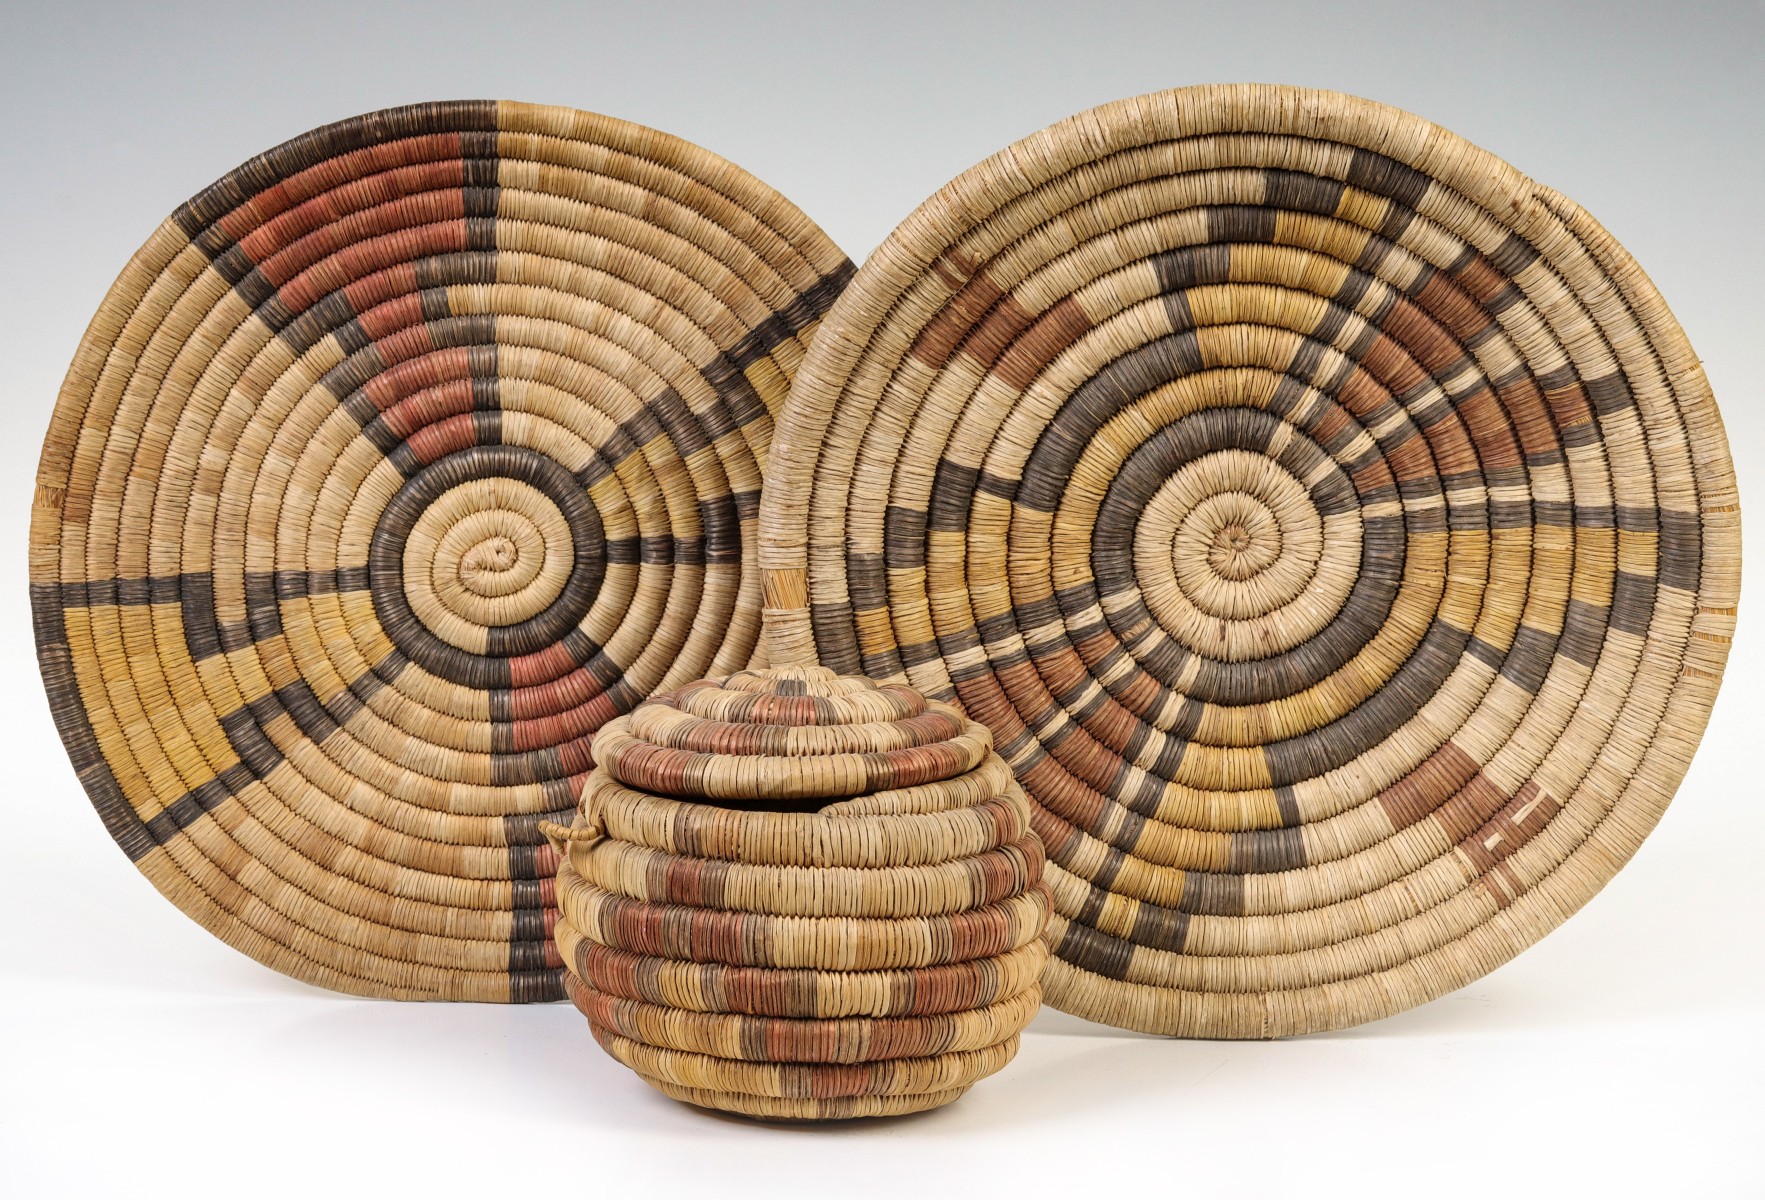 THREE EXAMPLES OF HOPI COILED BASKETRY